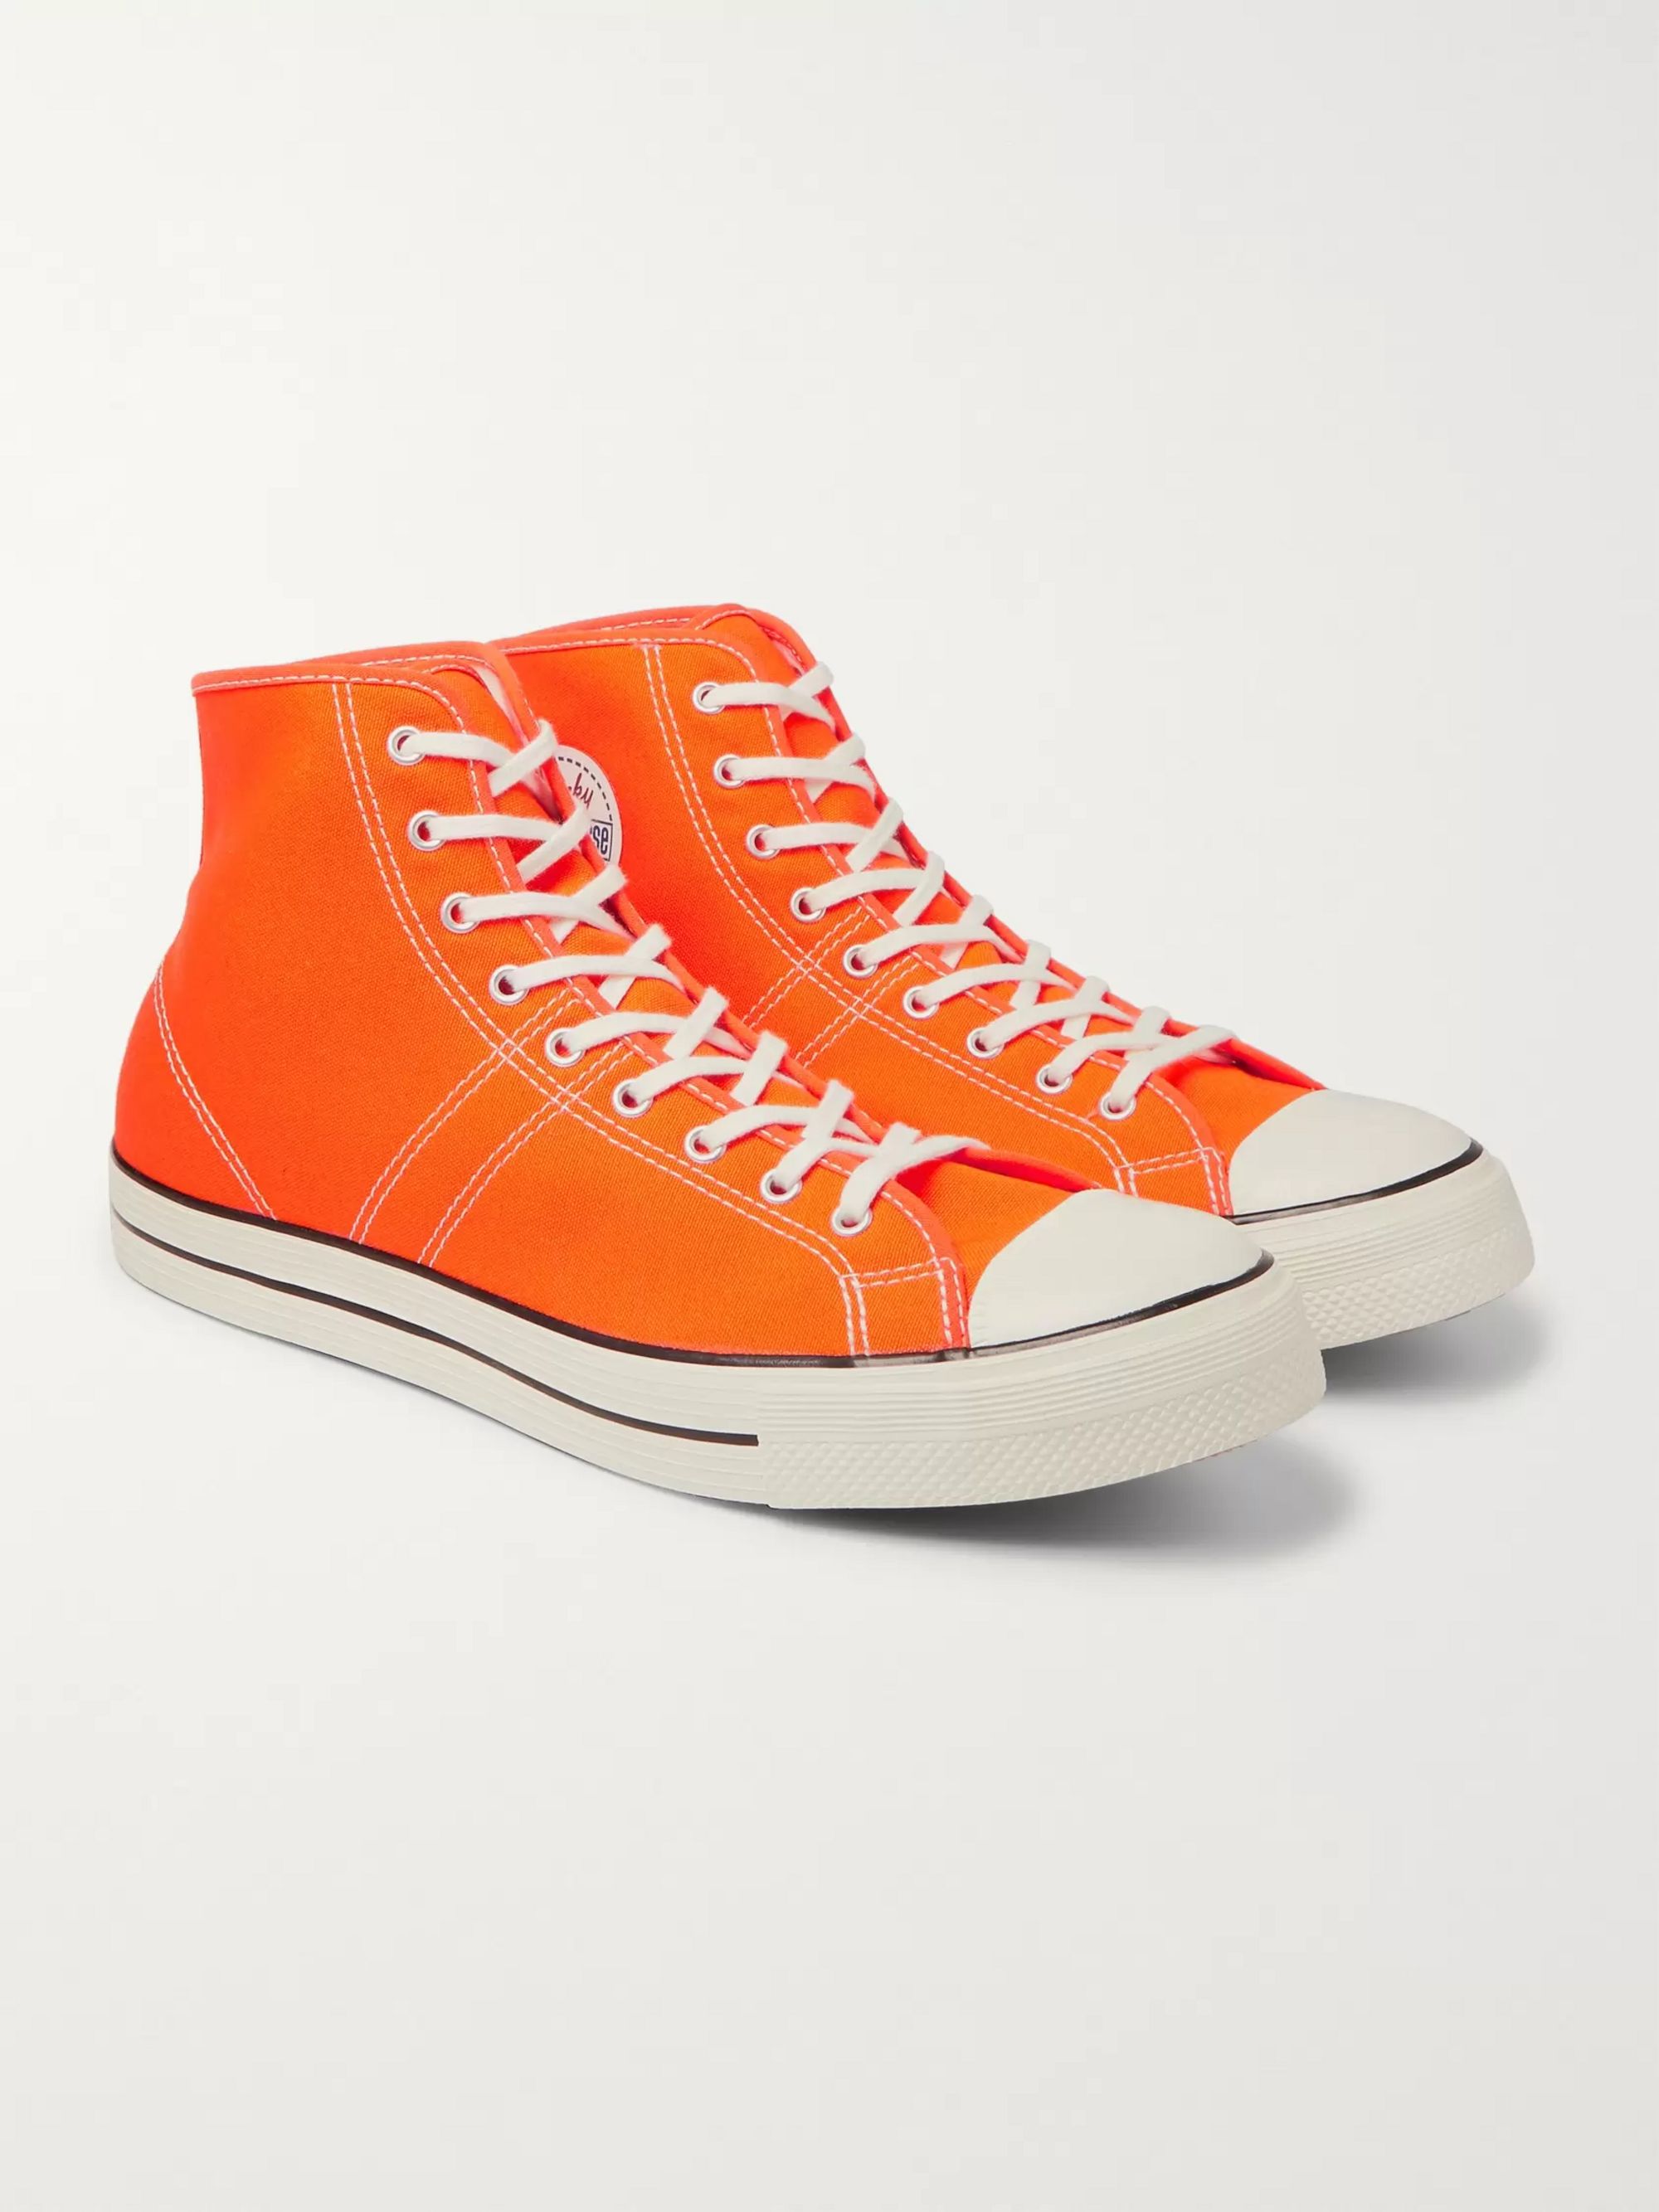 Orange Lucky Star Faded Glory Rubber 